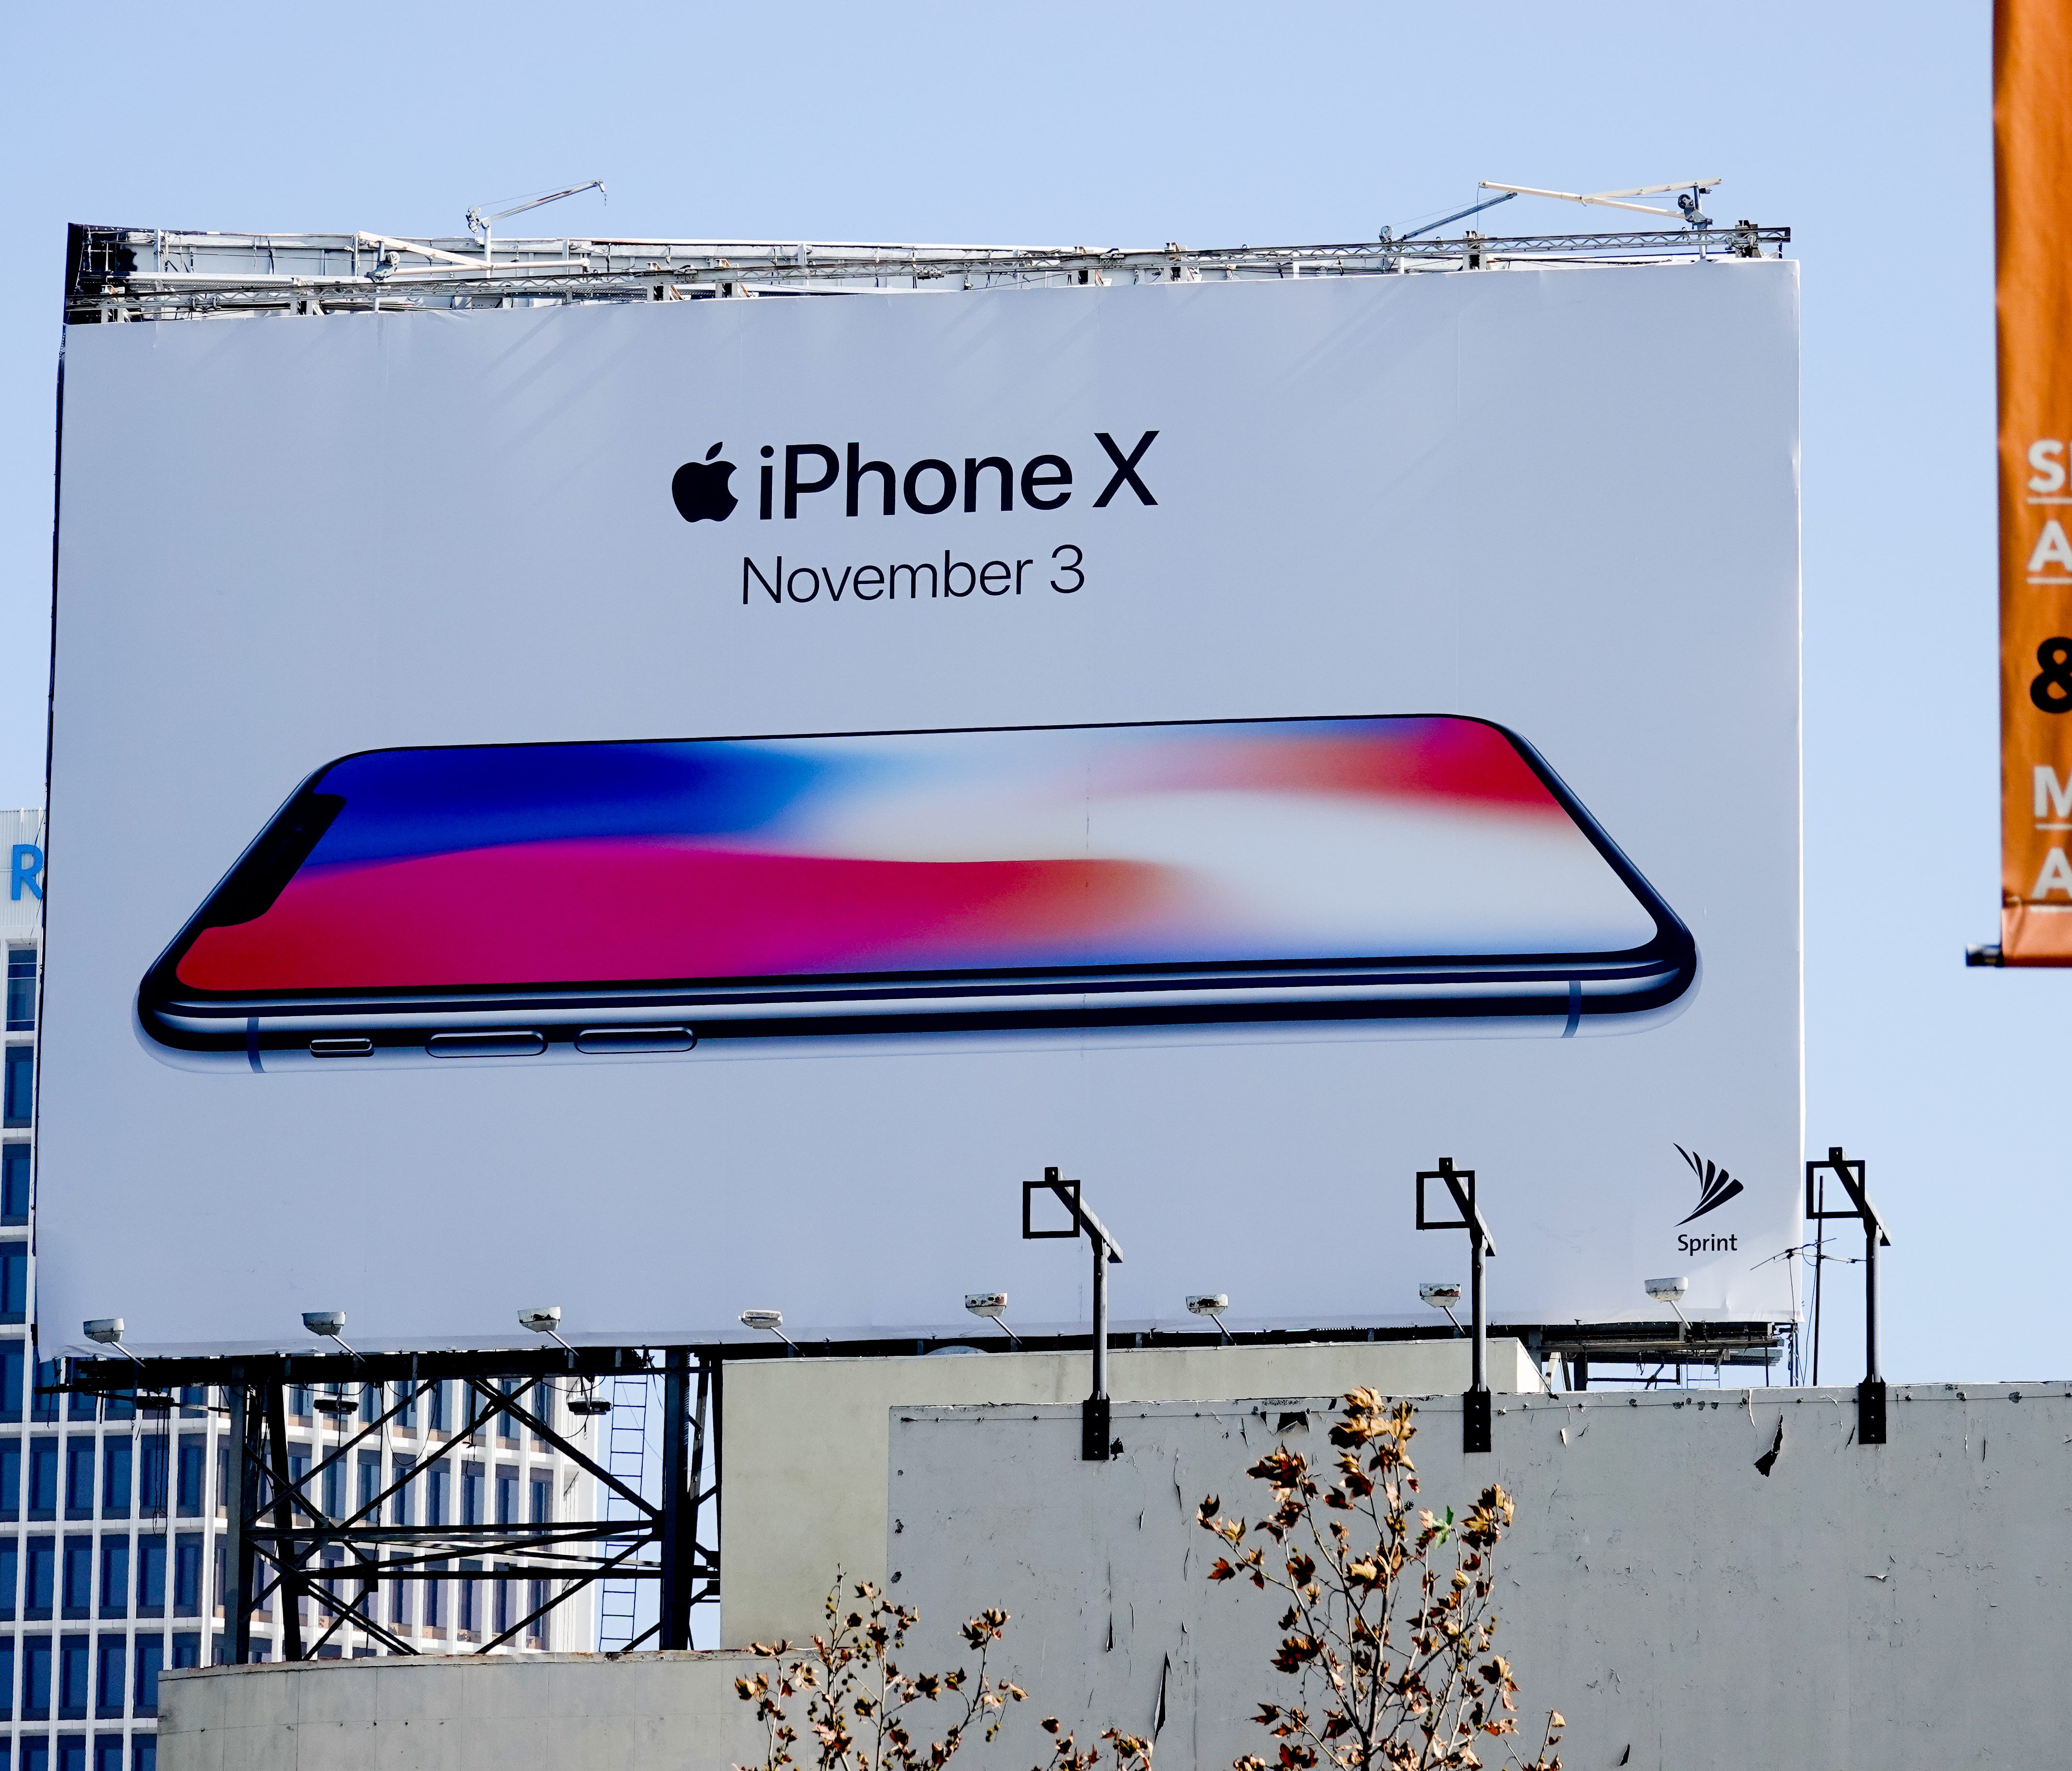 A billboard for the iPhone X in Los Angeles